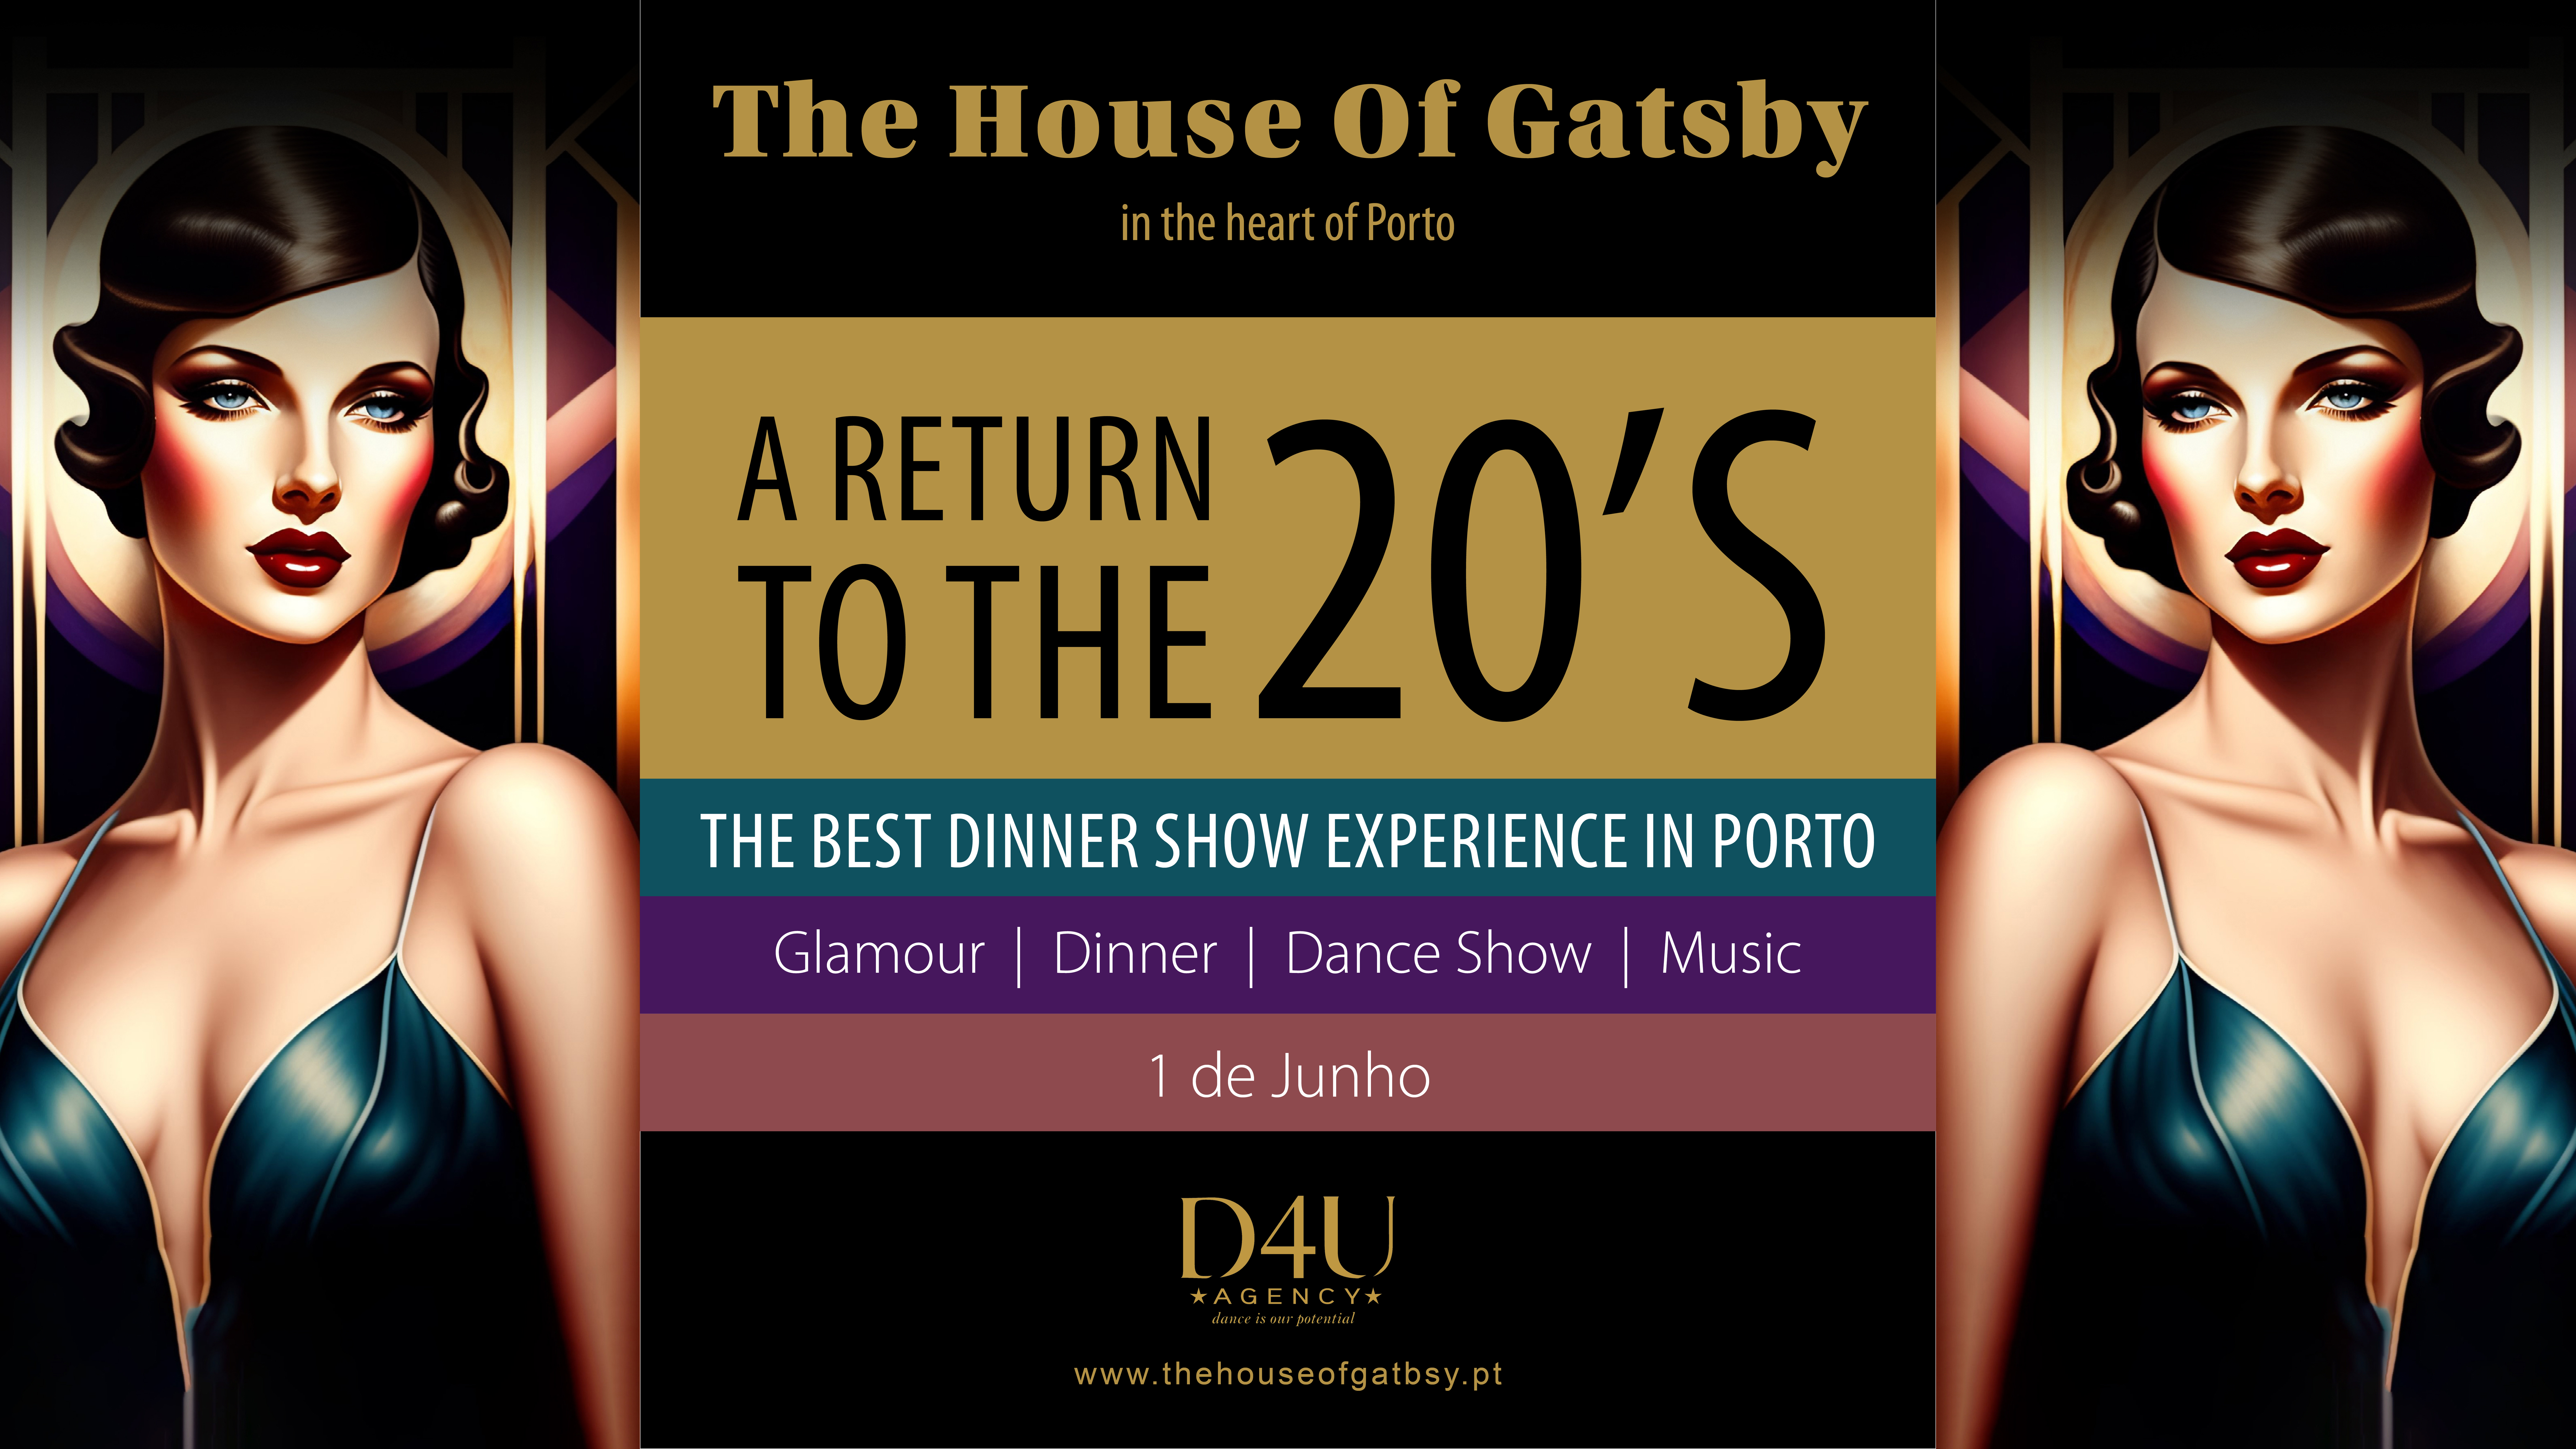 The House of Gatsby